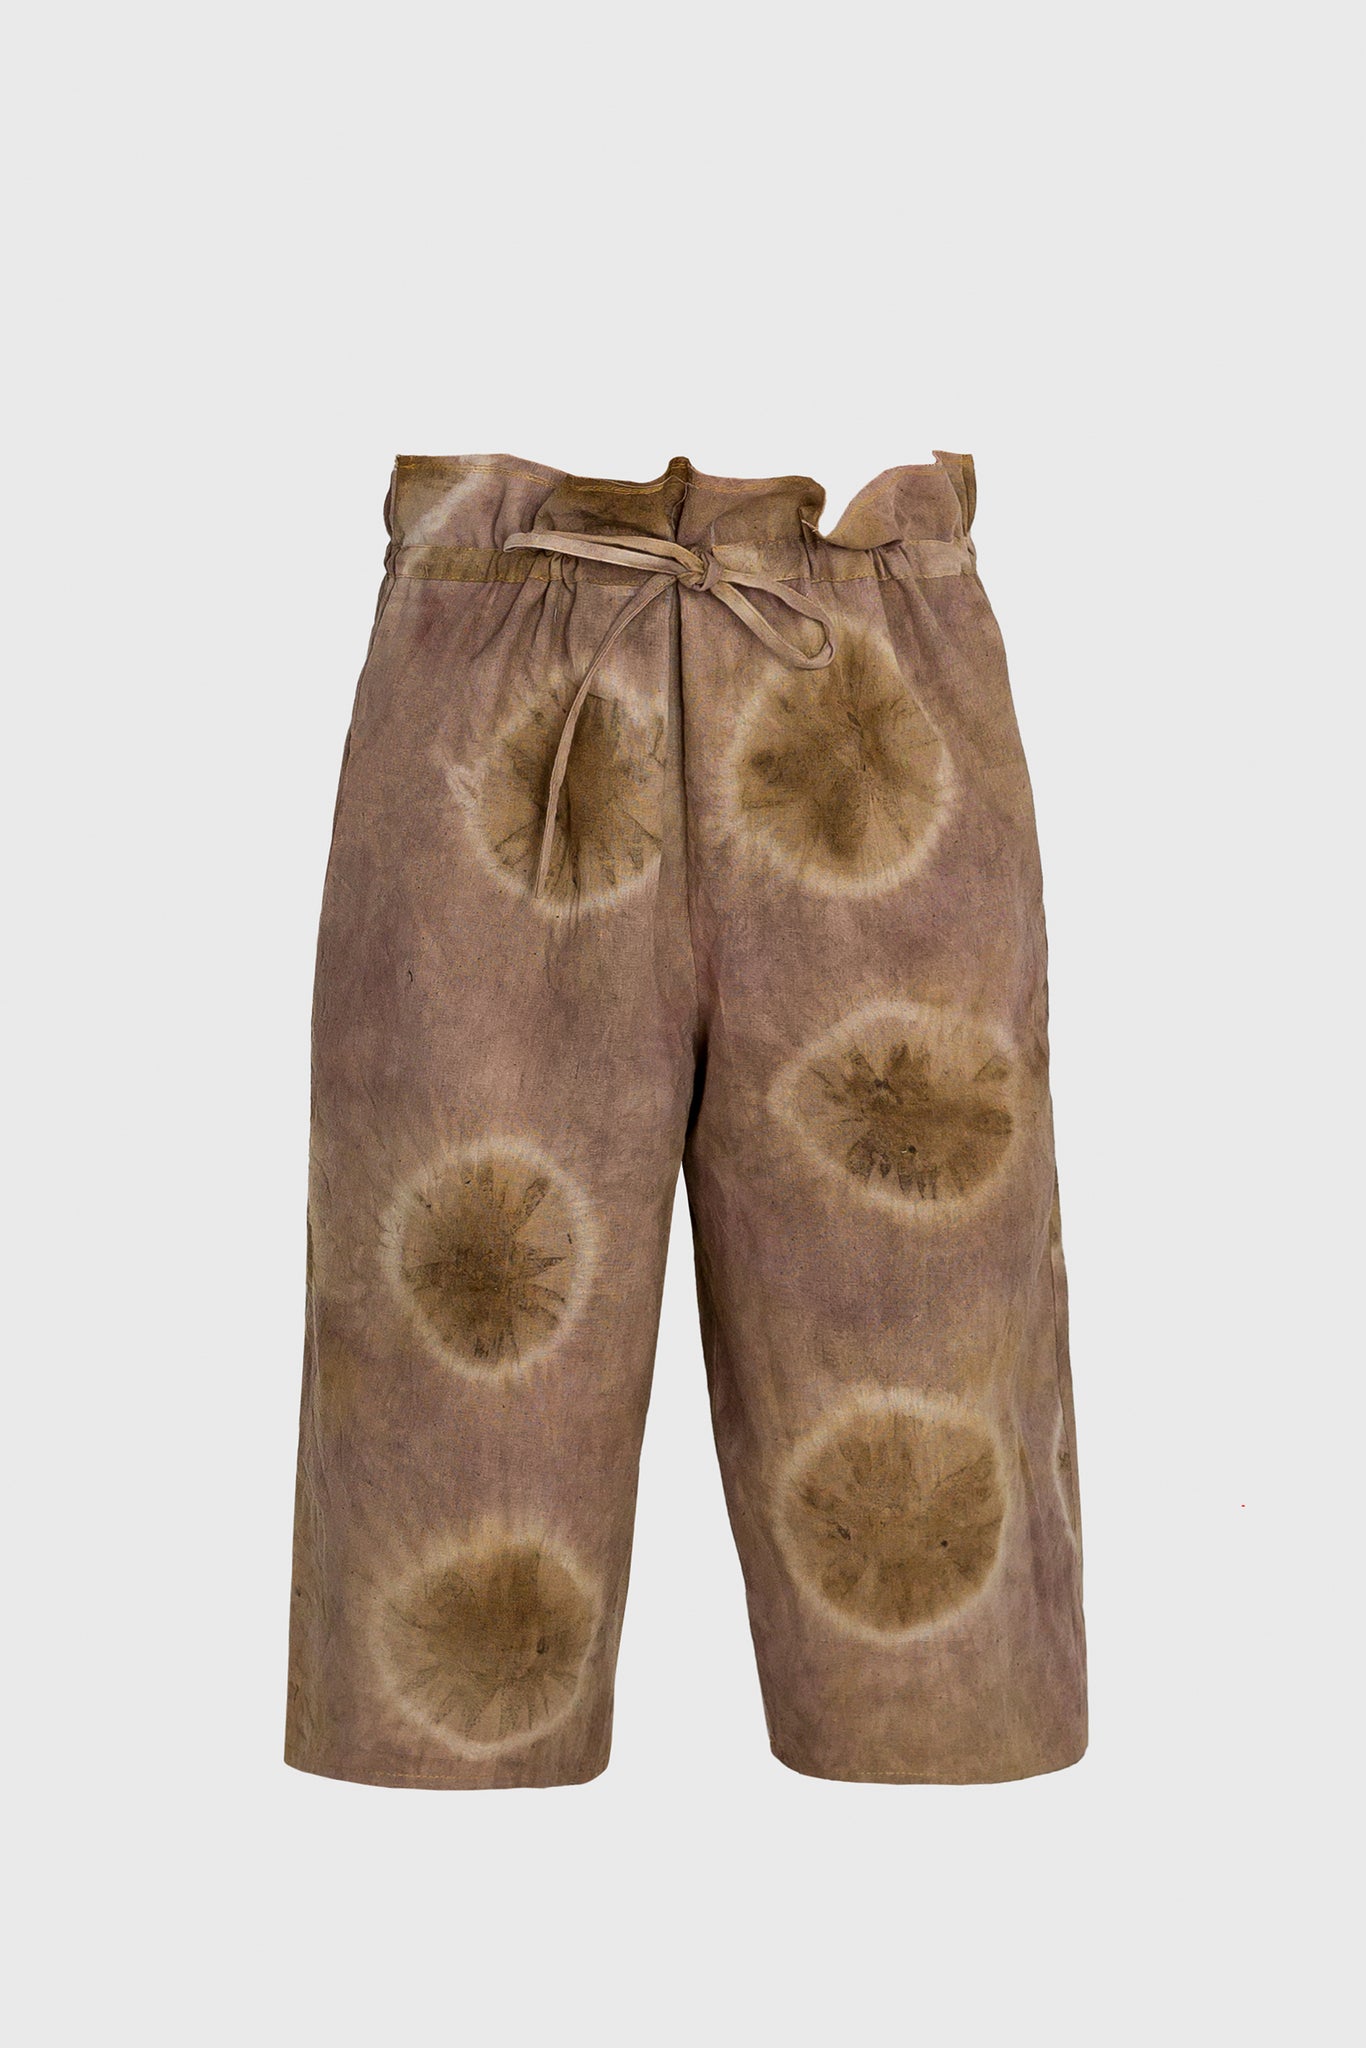 the new shorts for this summer, women and men, unisex design, naturally dyed, chemical free, high end young luxury, design oriented fashion, for a sustainable lifestyle, earth-tone colors, shibori circles